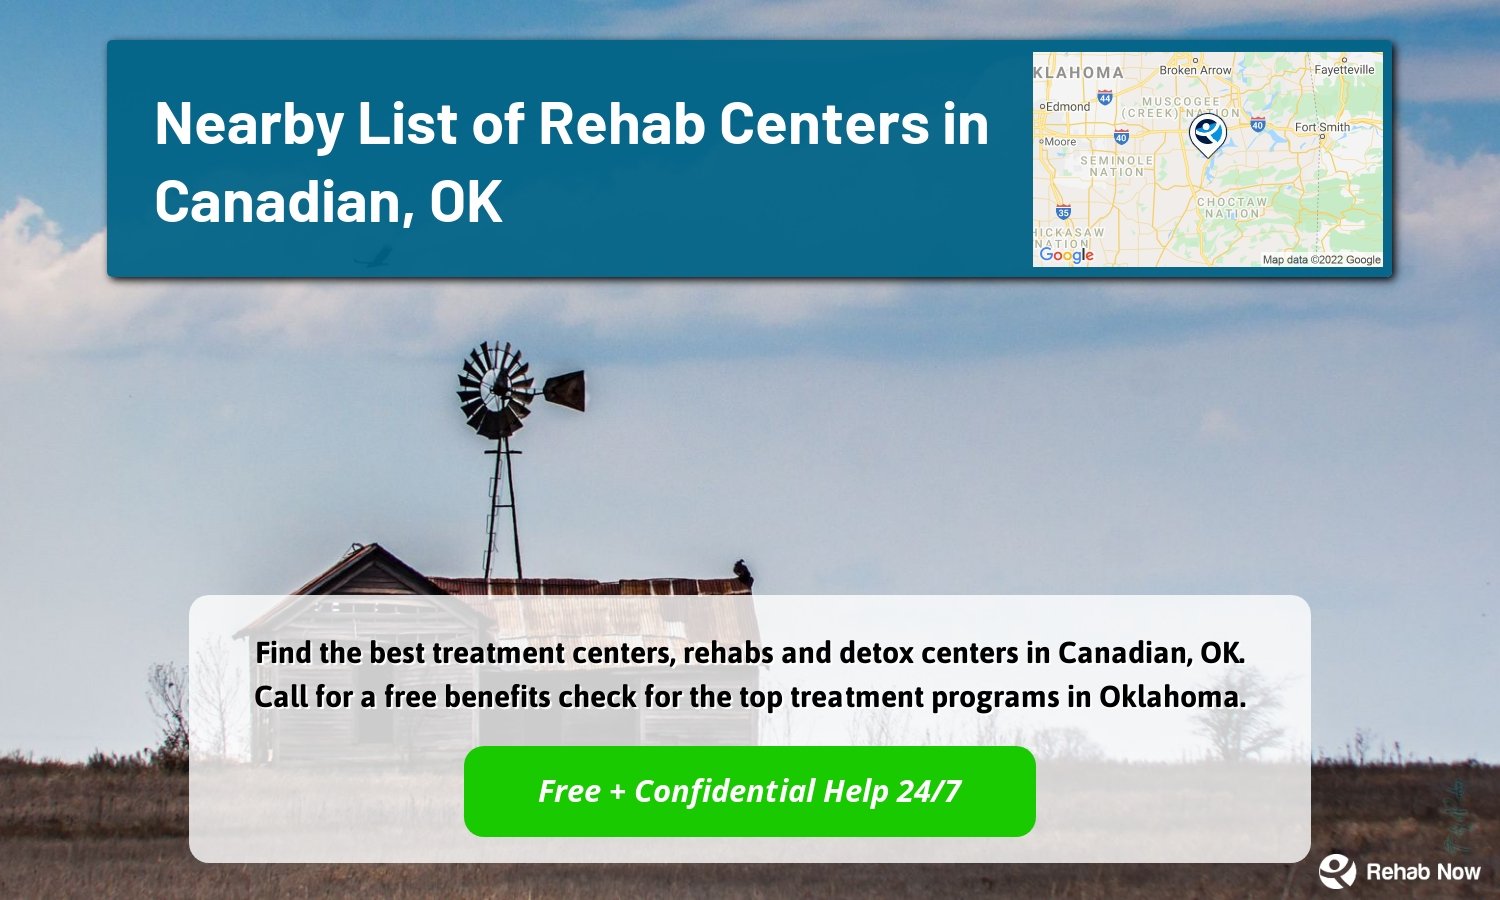 Find the best treatment centers, rehabs and detox centers in Canadian, OK. Call for a free benefits check for the top treatment programs in Oklahoma.